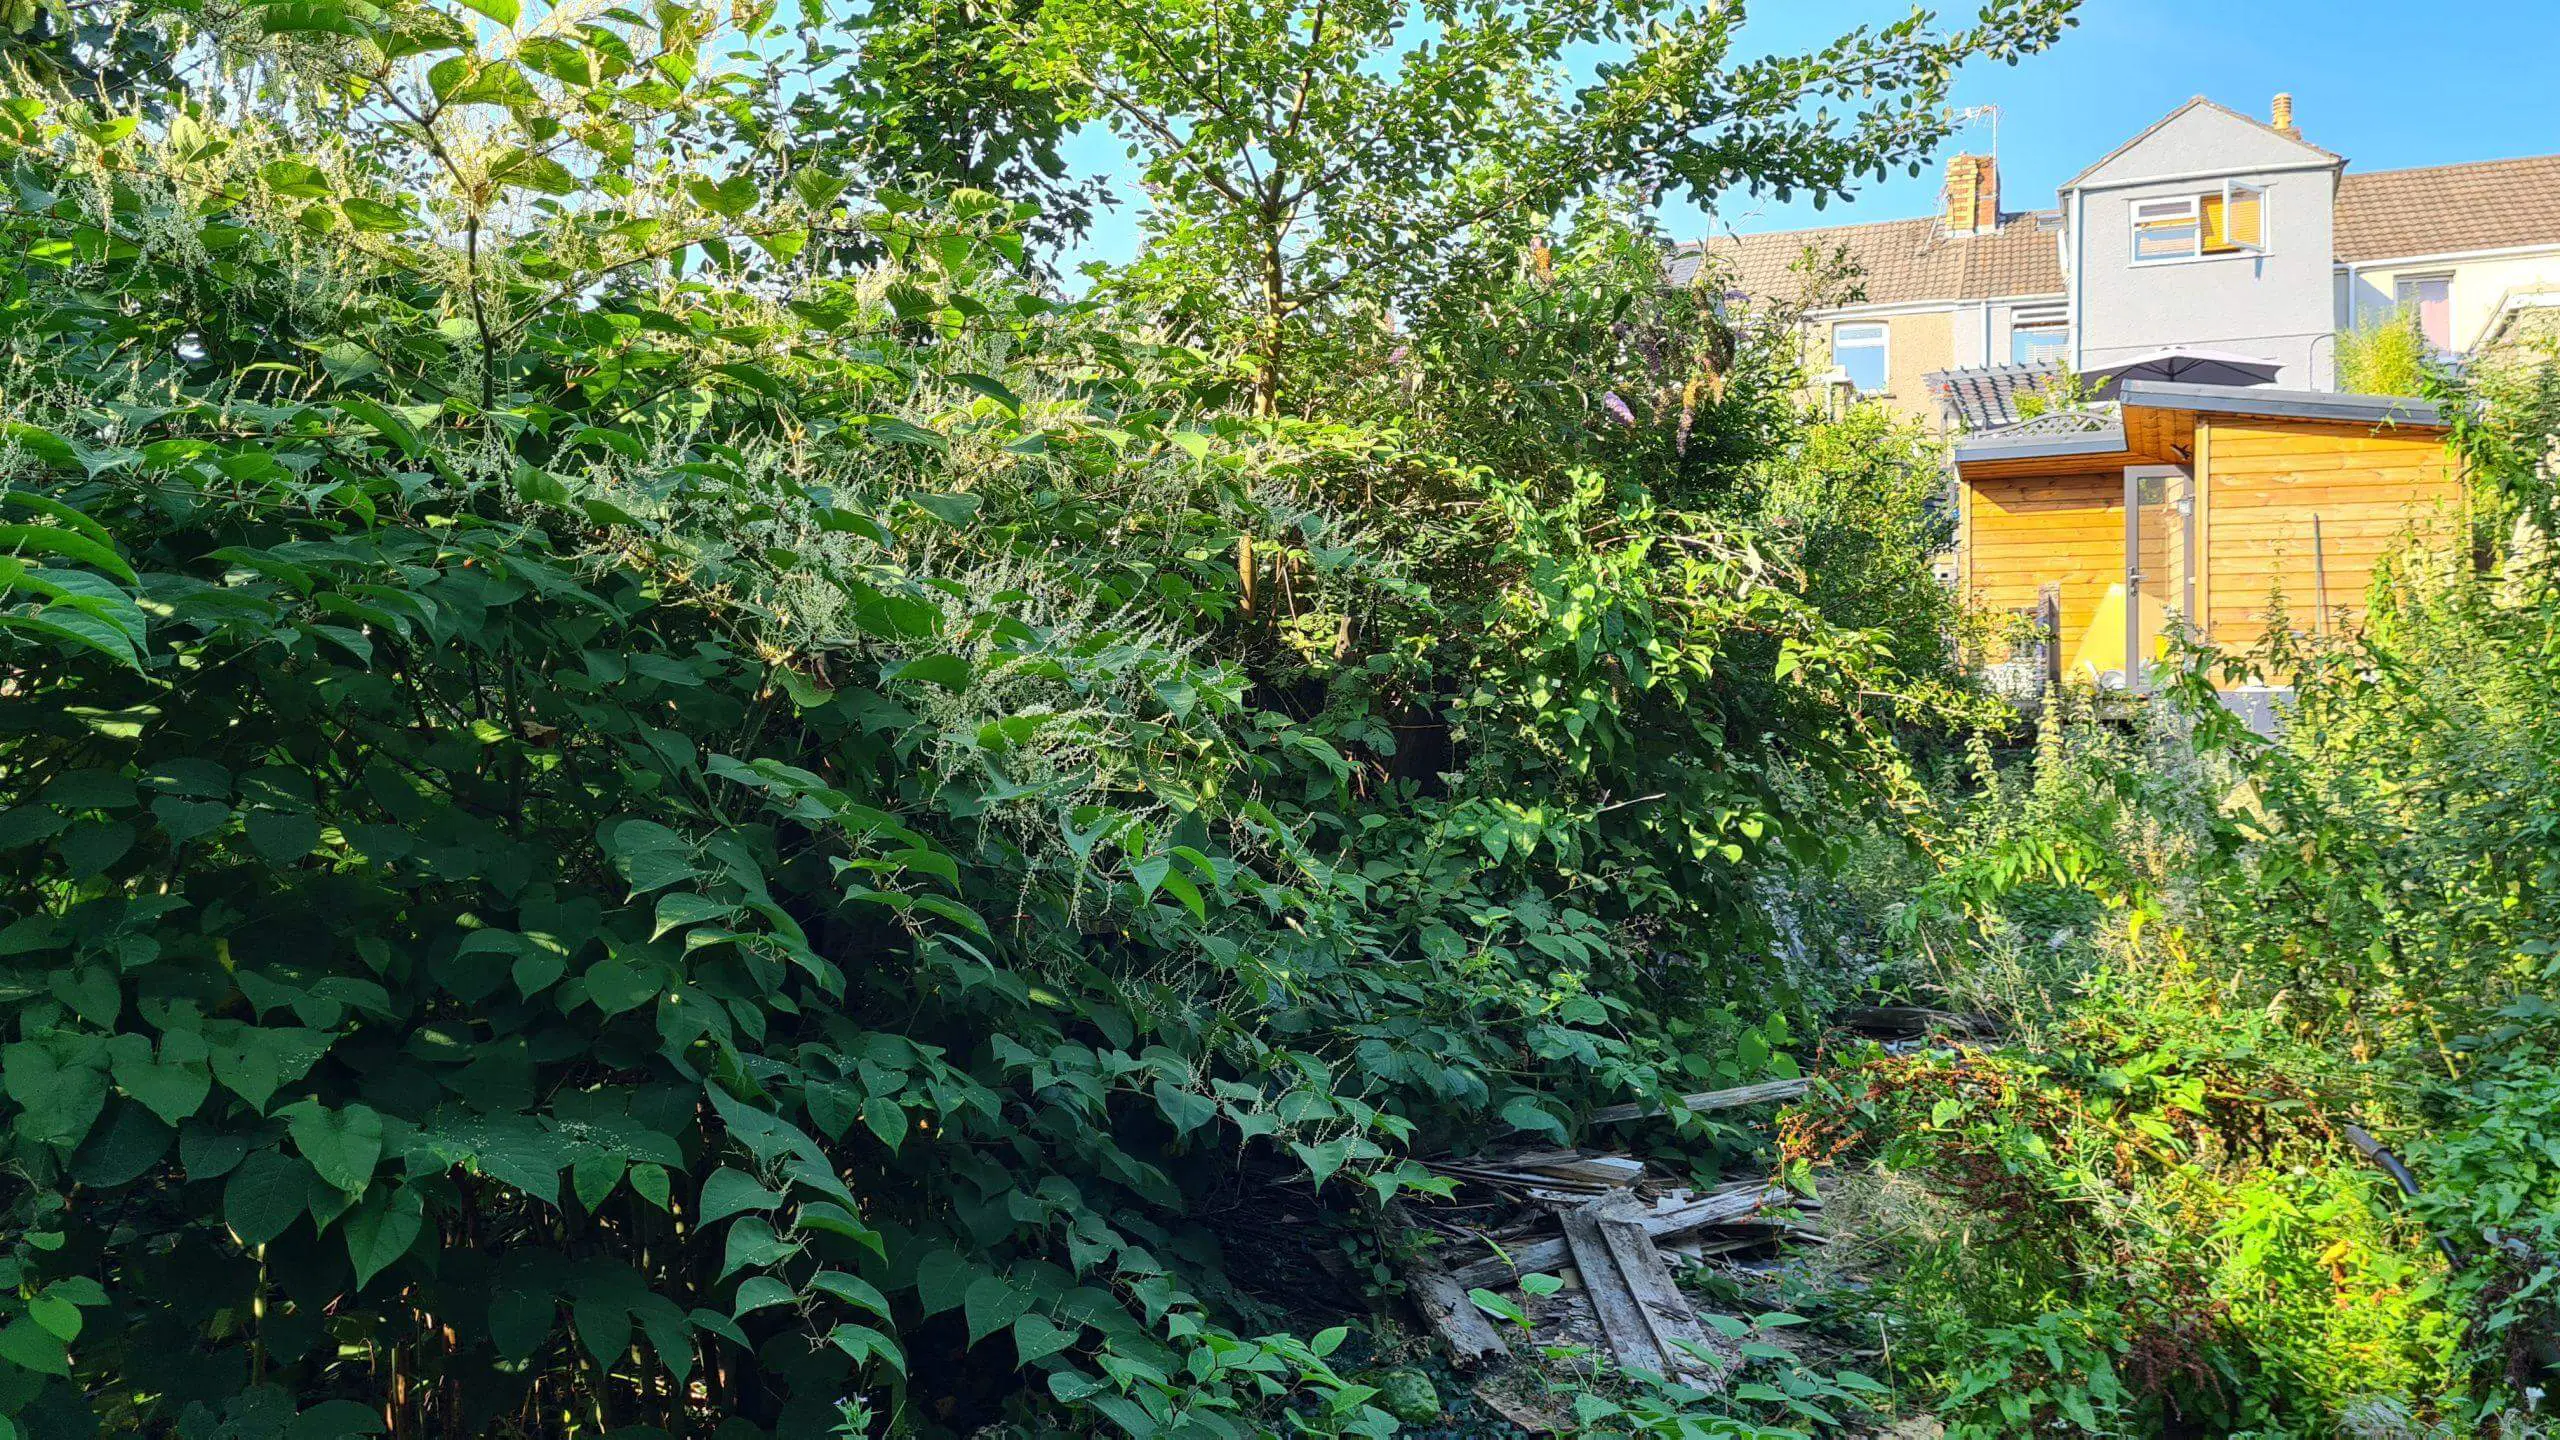 Japanese knotweed in full bloom and consuming a vast amount of a garden